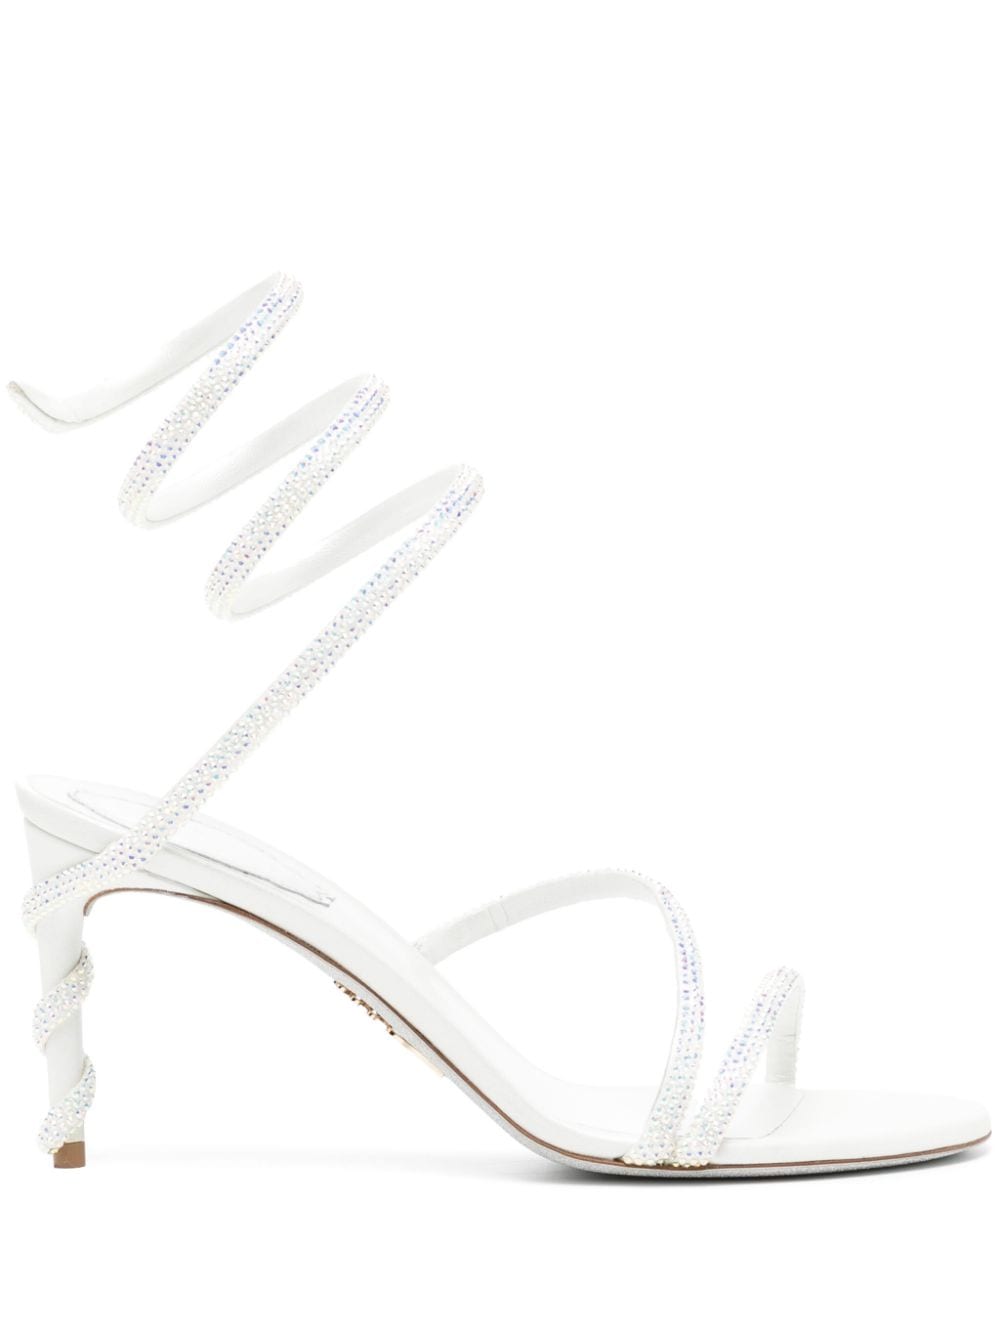 René Caovilla Margot Embellished Leather Sandals In White